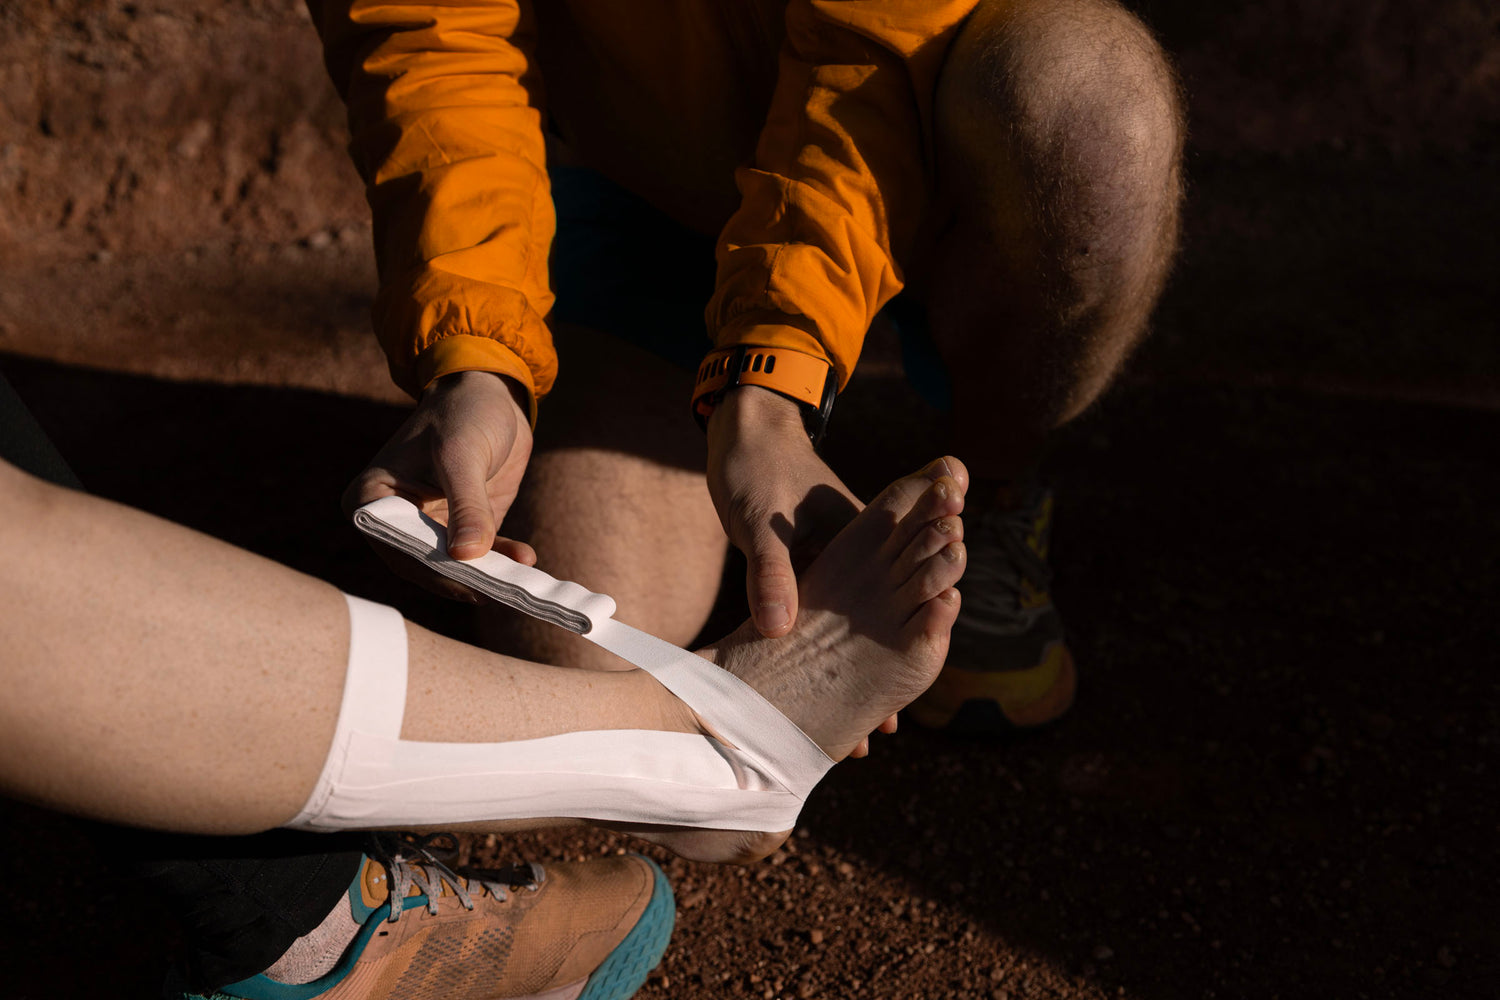 A search and rescue recommended tape on a flat packed roll is applied to an injured leg